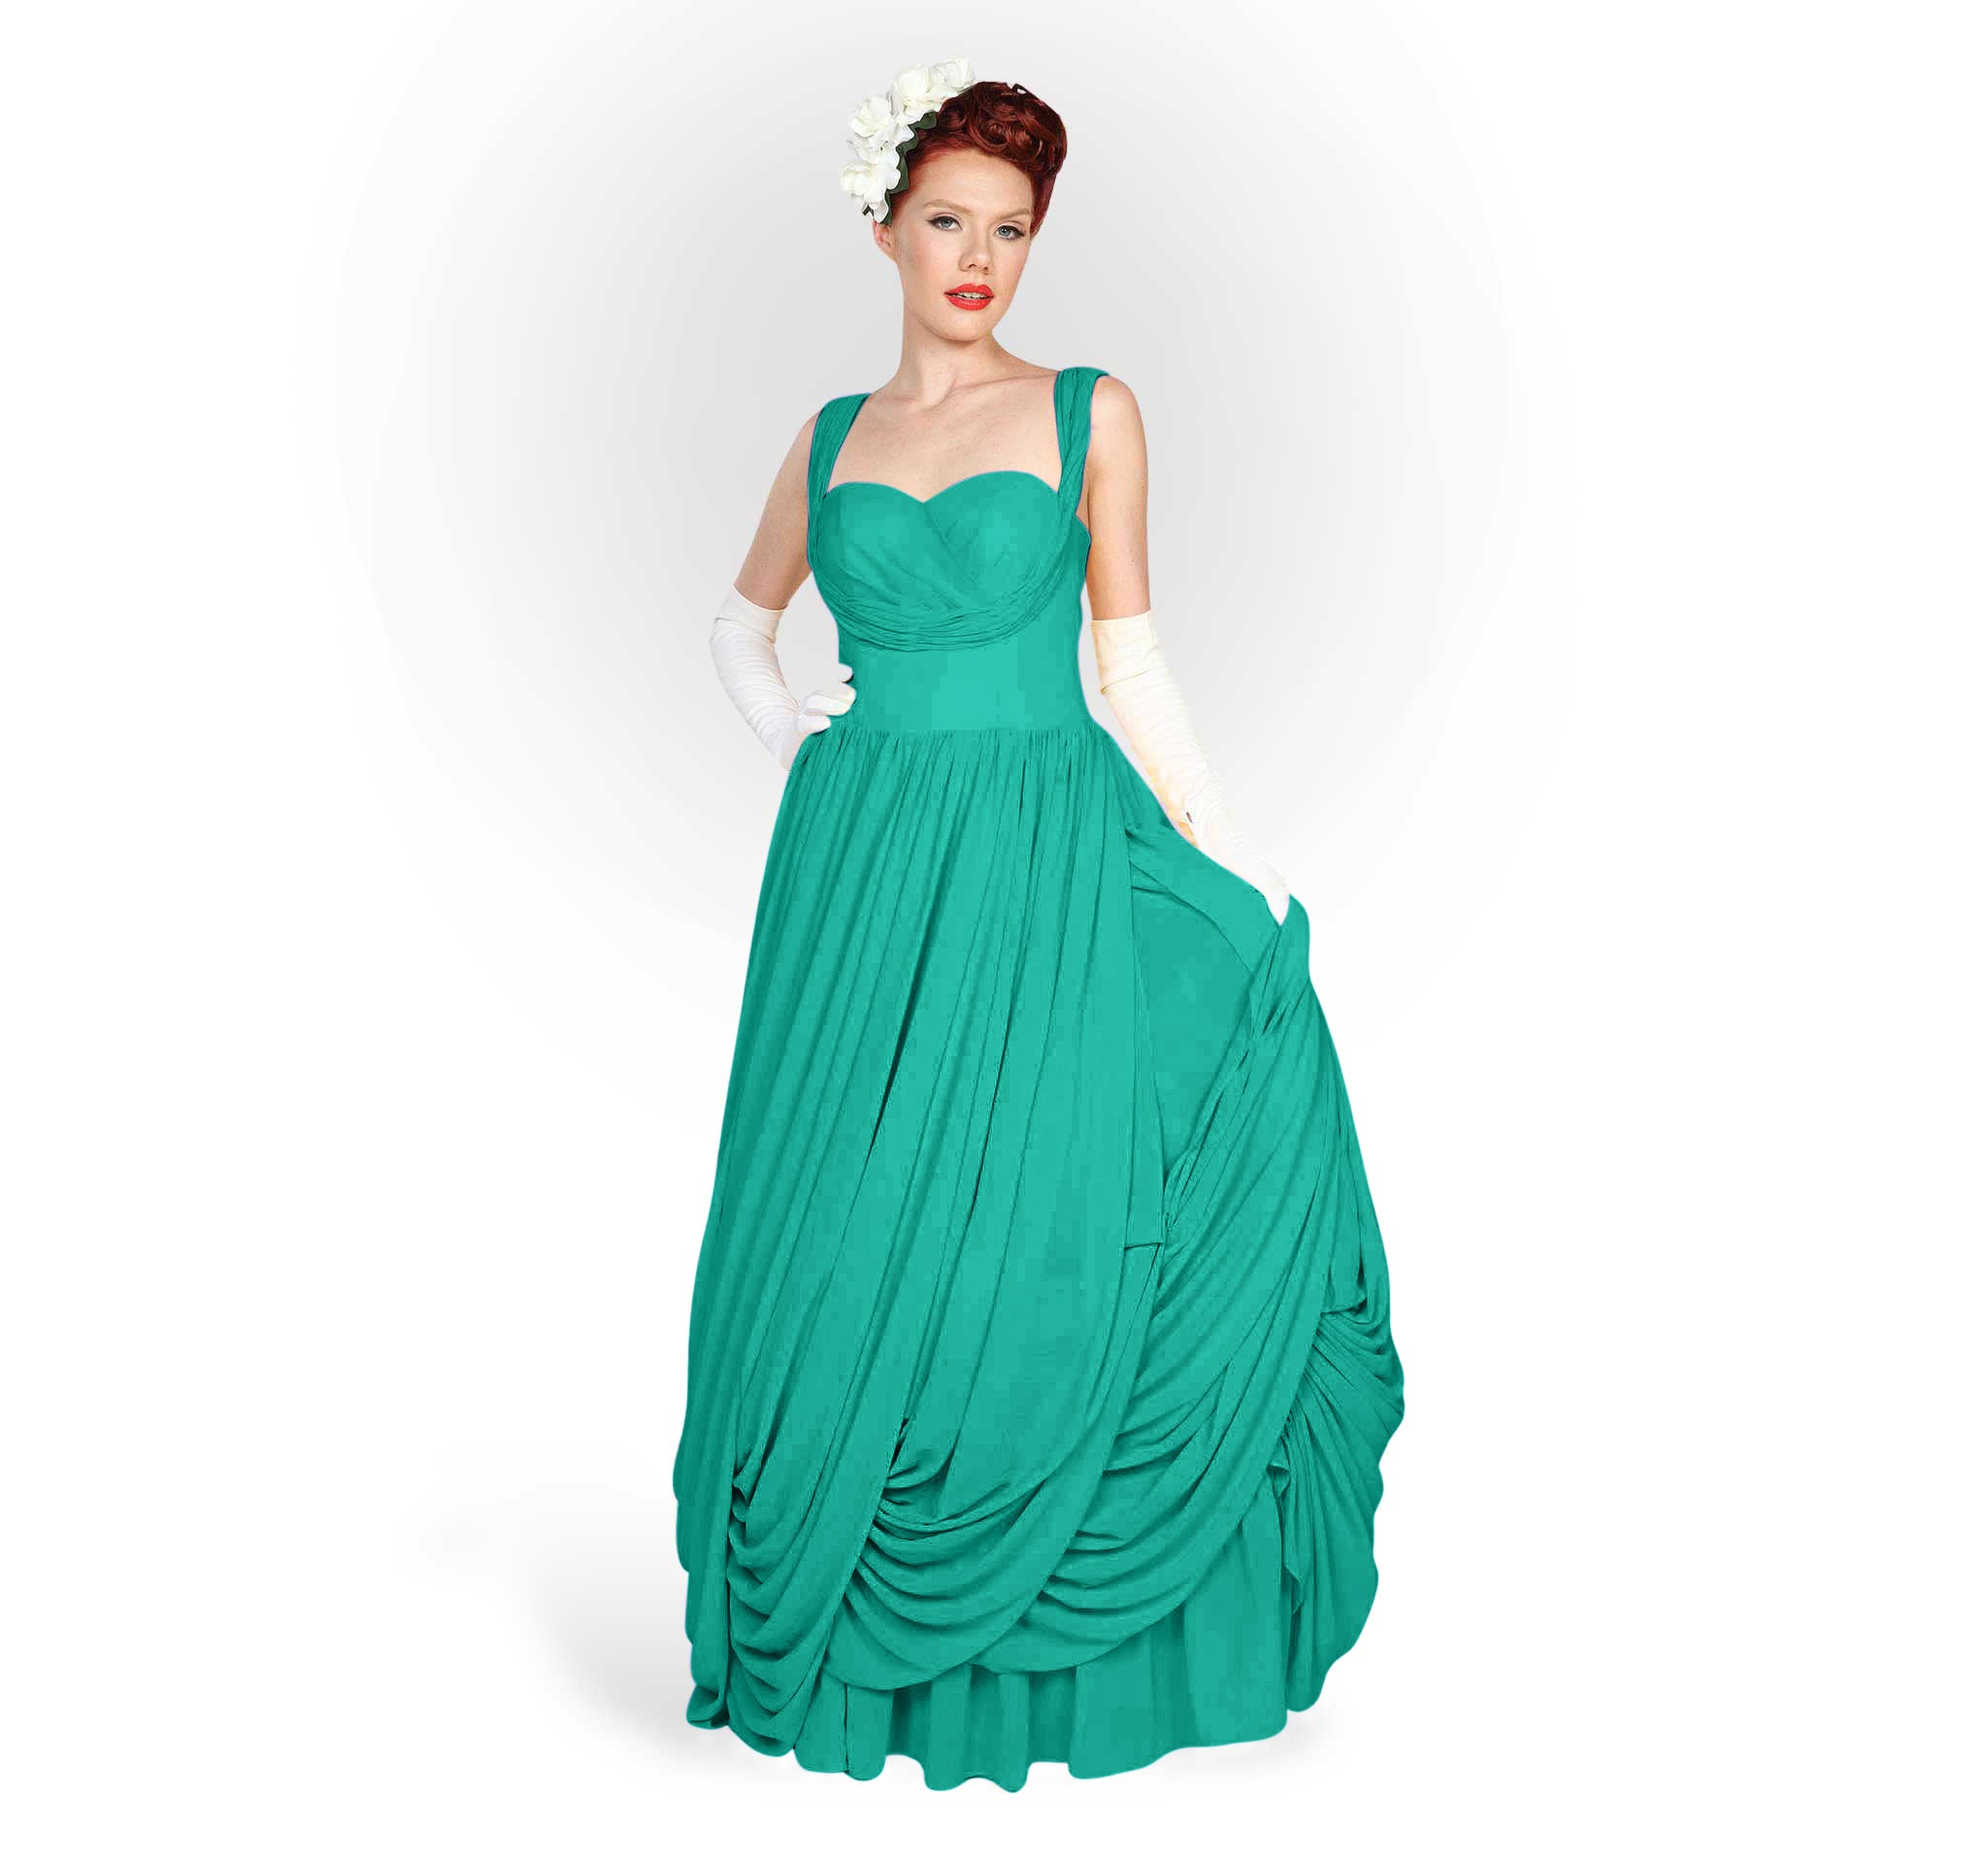 "Hartford" 1950s Ball Gown